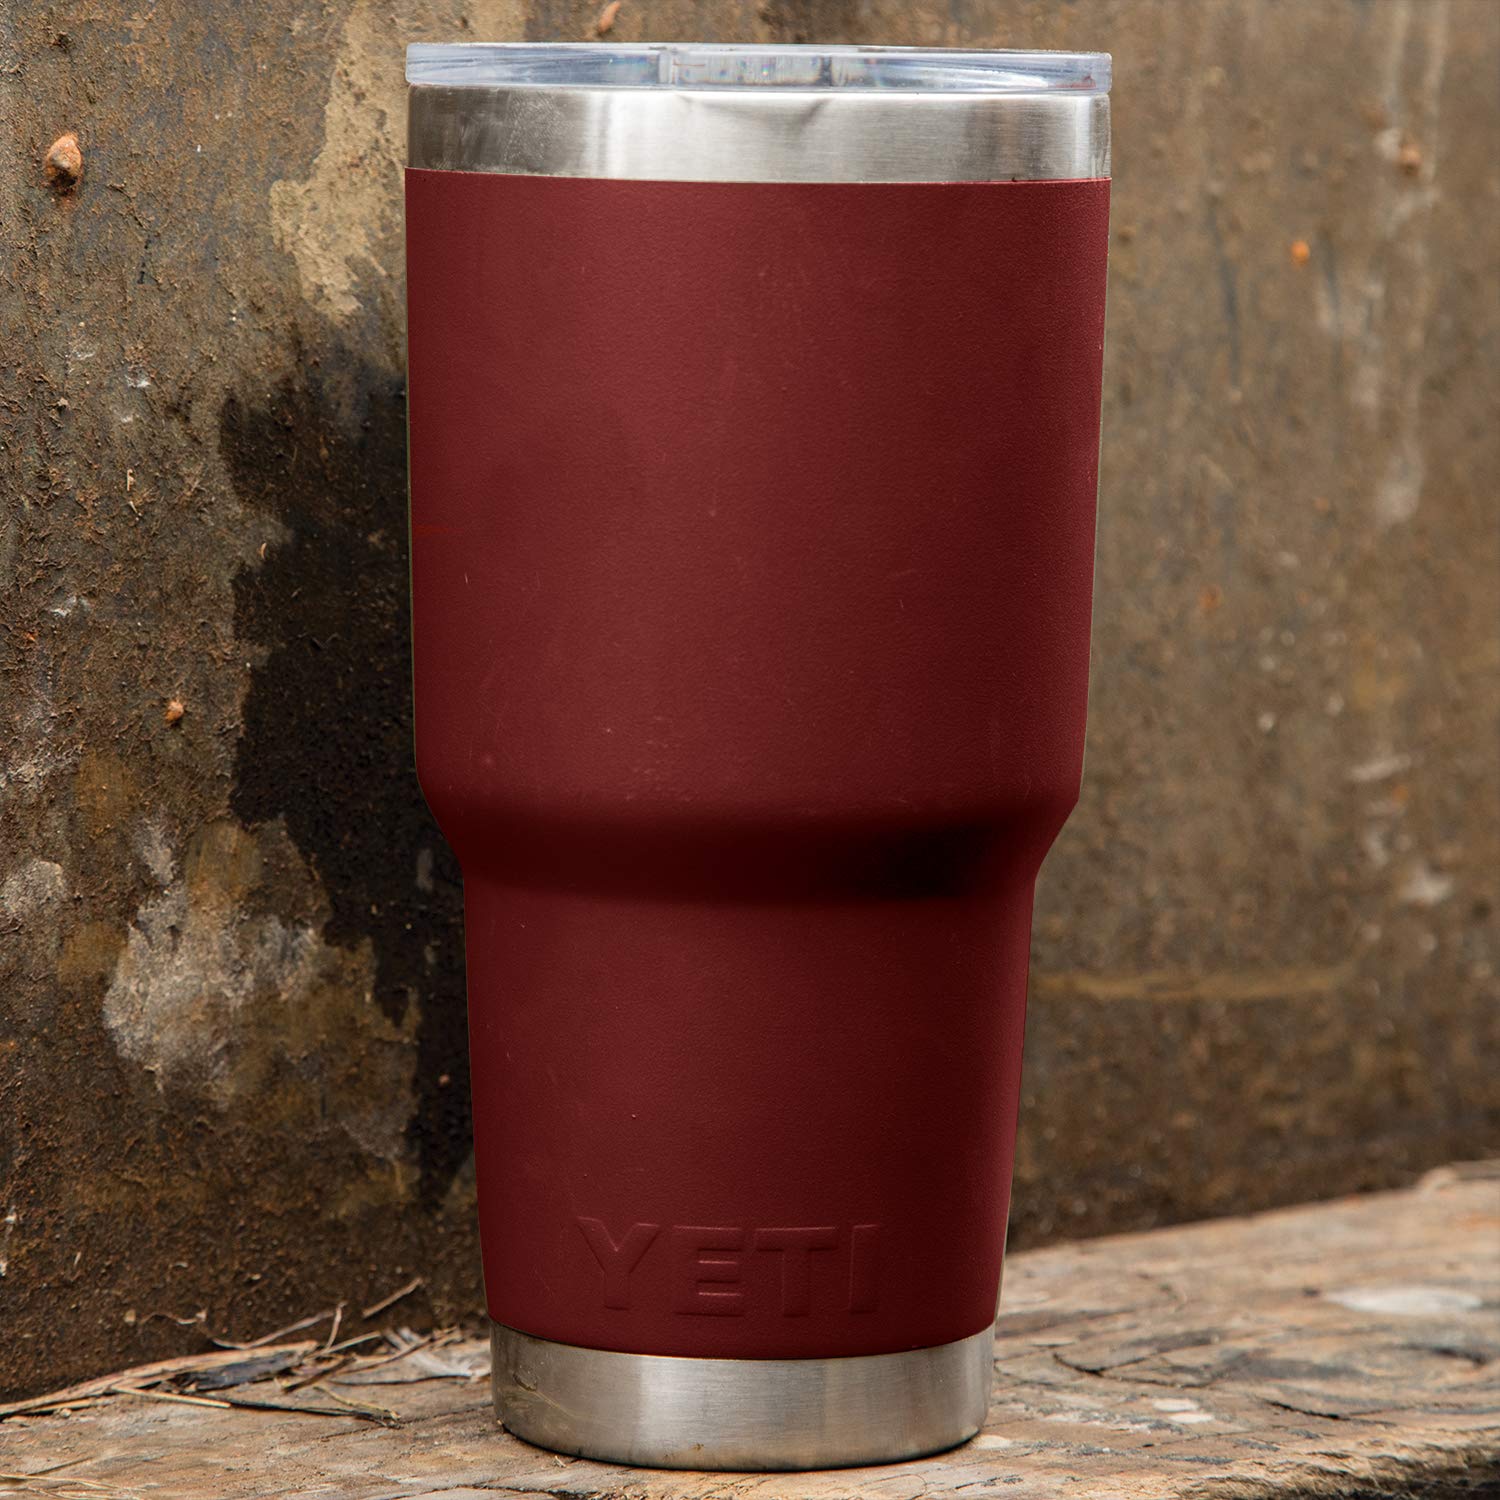 YETI Rambler 30 oz Stainless Steel Vacuum Insulated Tumbler w/MagSlider Lid, Brick Red